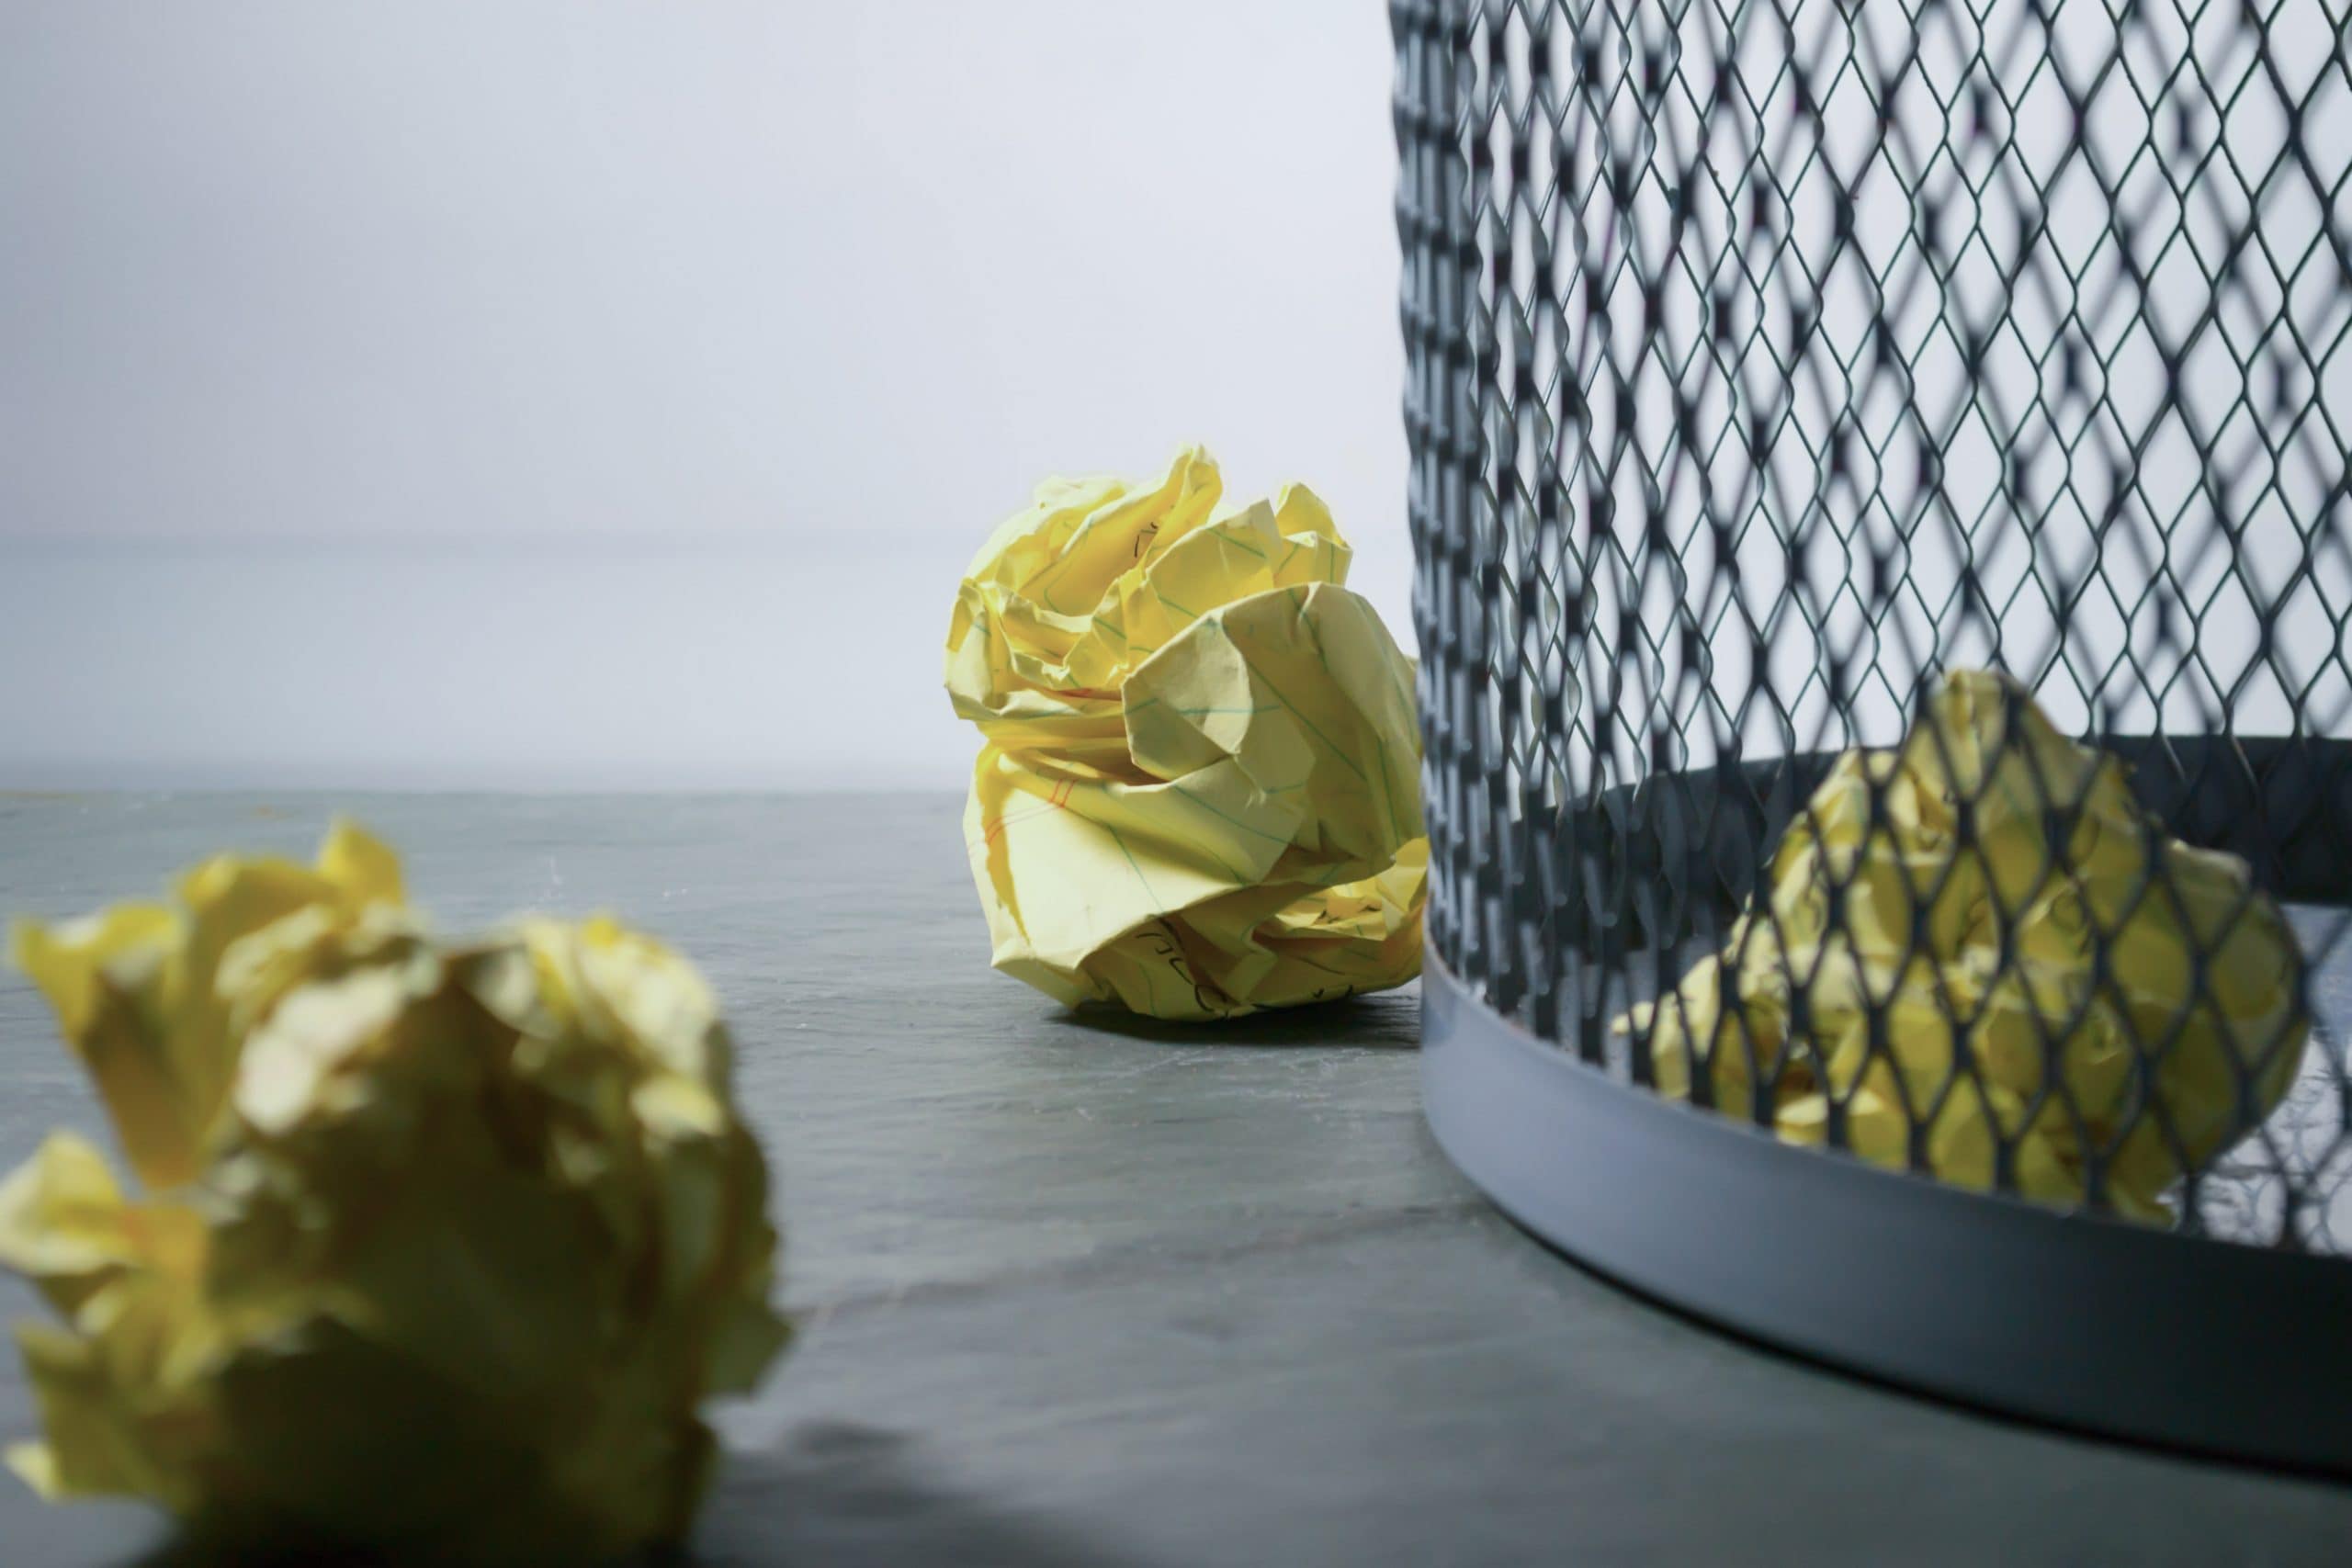 Bin with several pieces of scrunched up yellow paper in it and near it